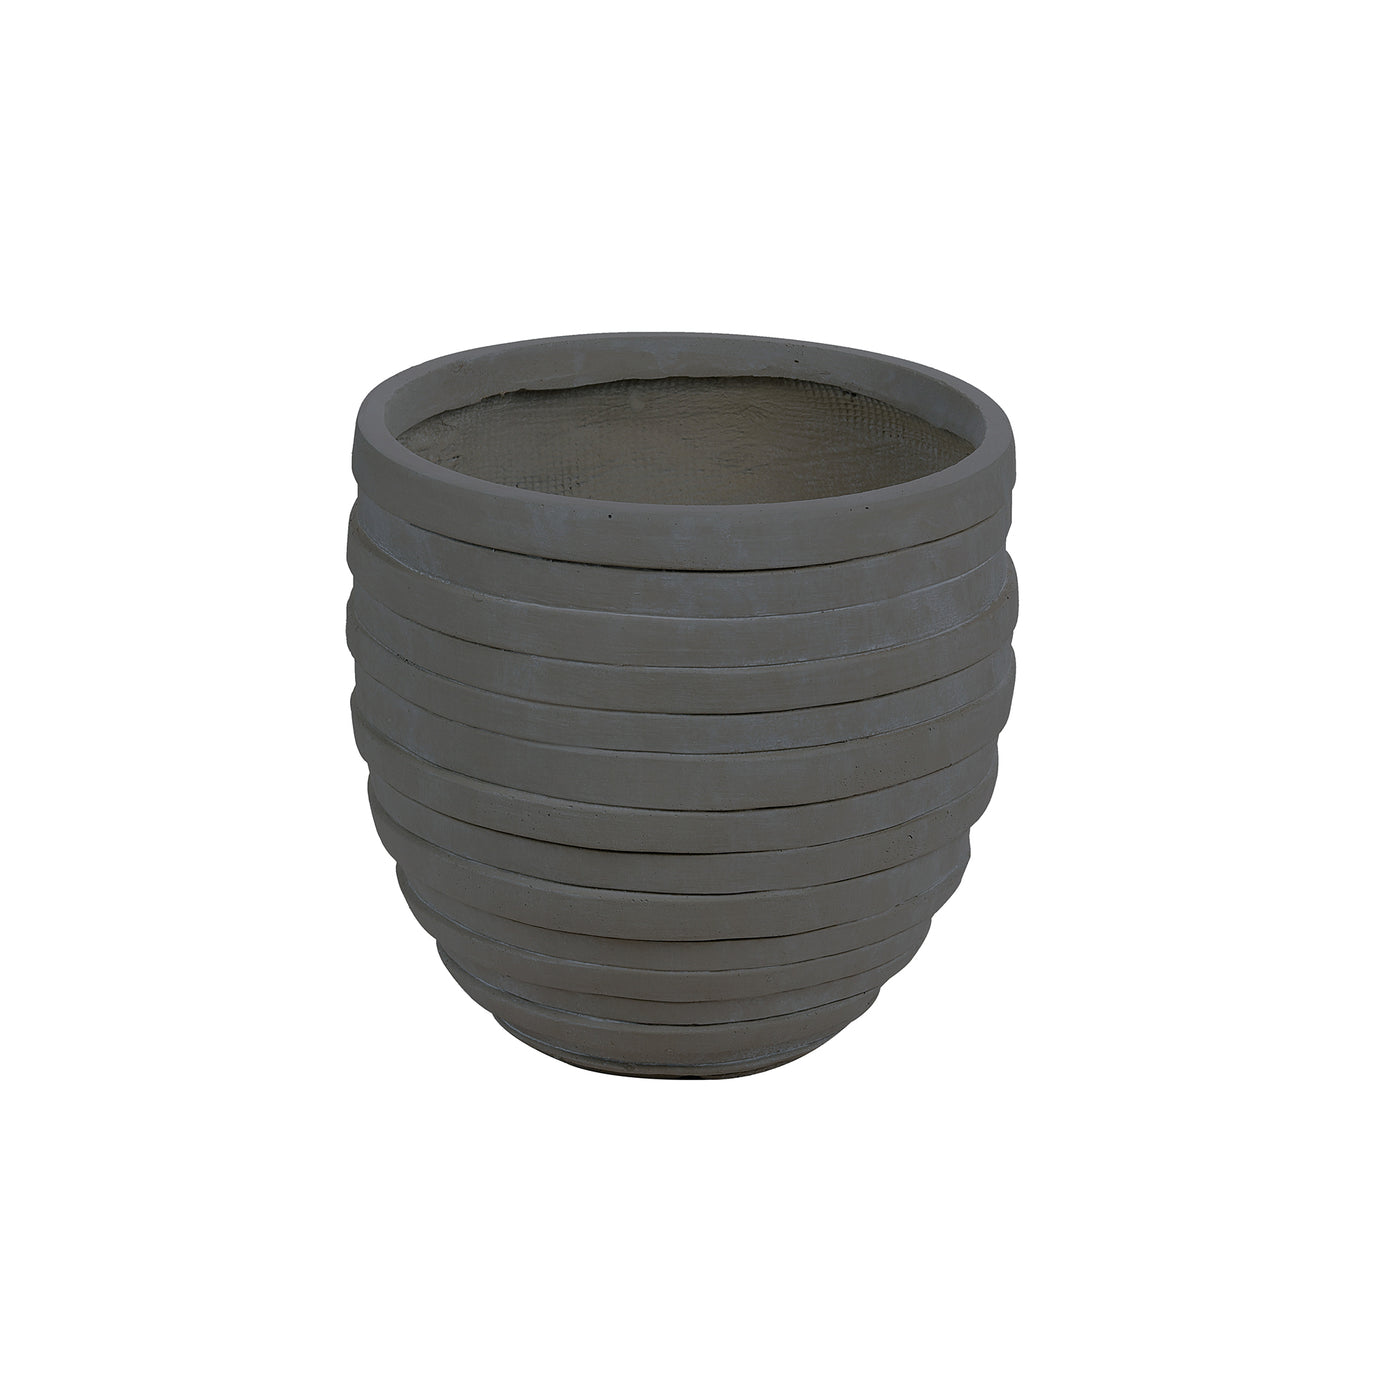 High-quality horizontal striped textured planter in charcoal